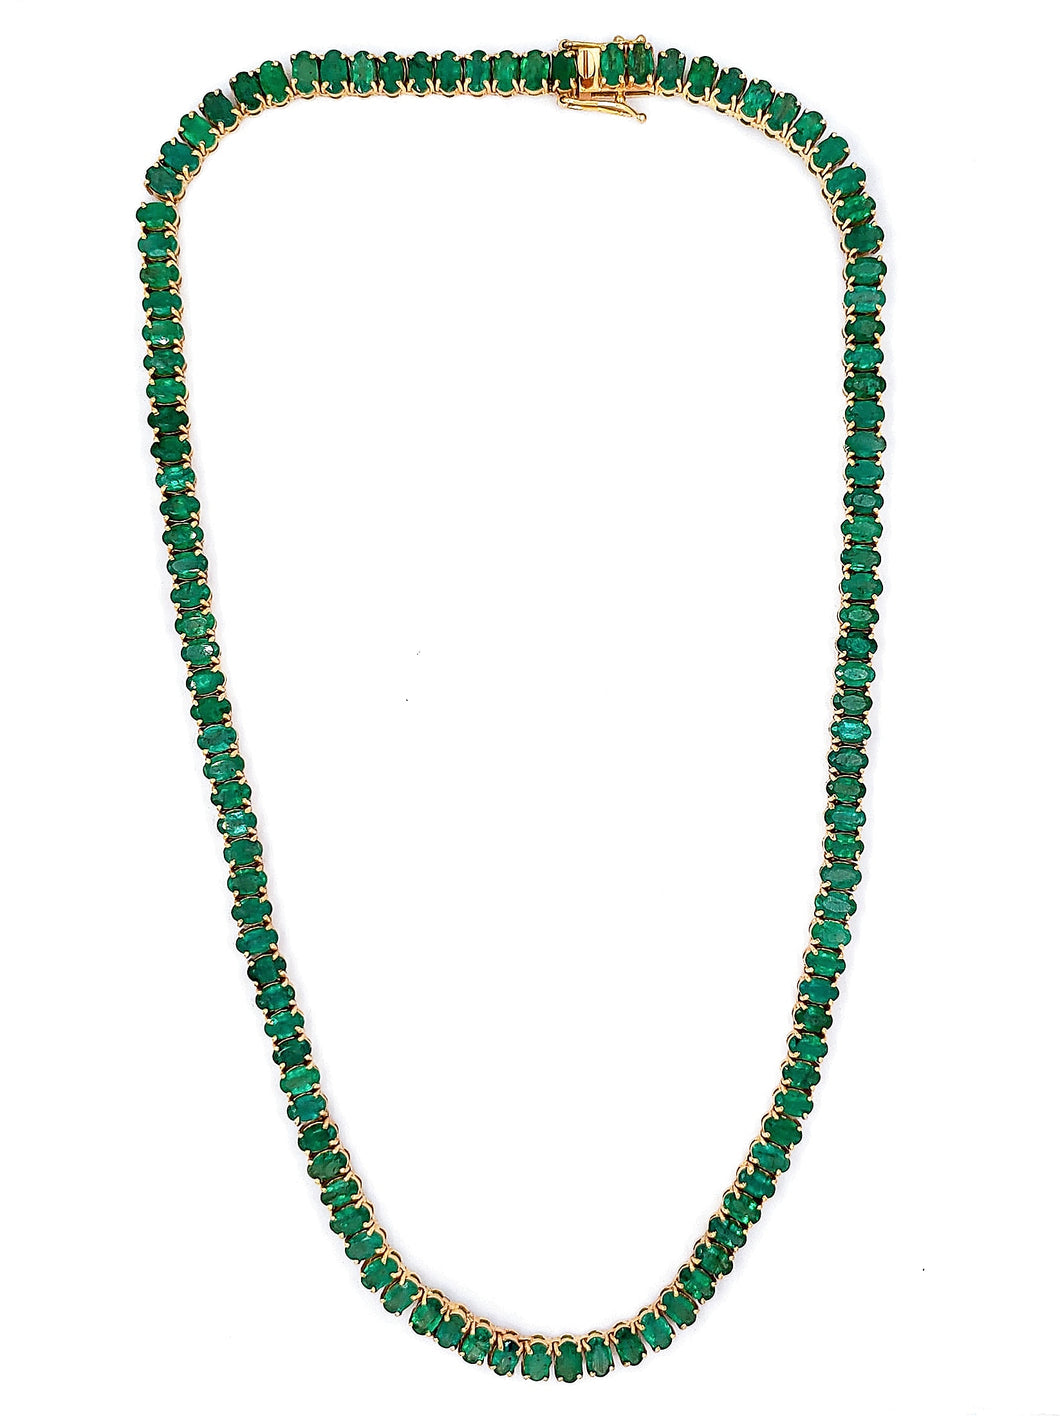 24 Ct Oval Shaped Emerald Tennis Necklace in 14K gold